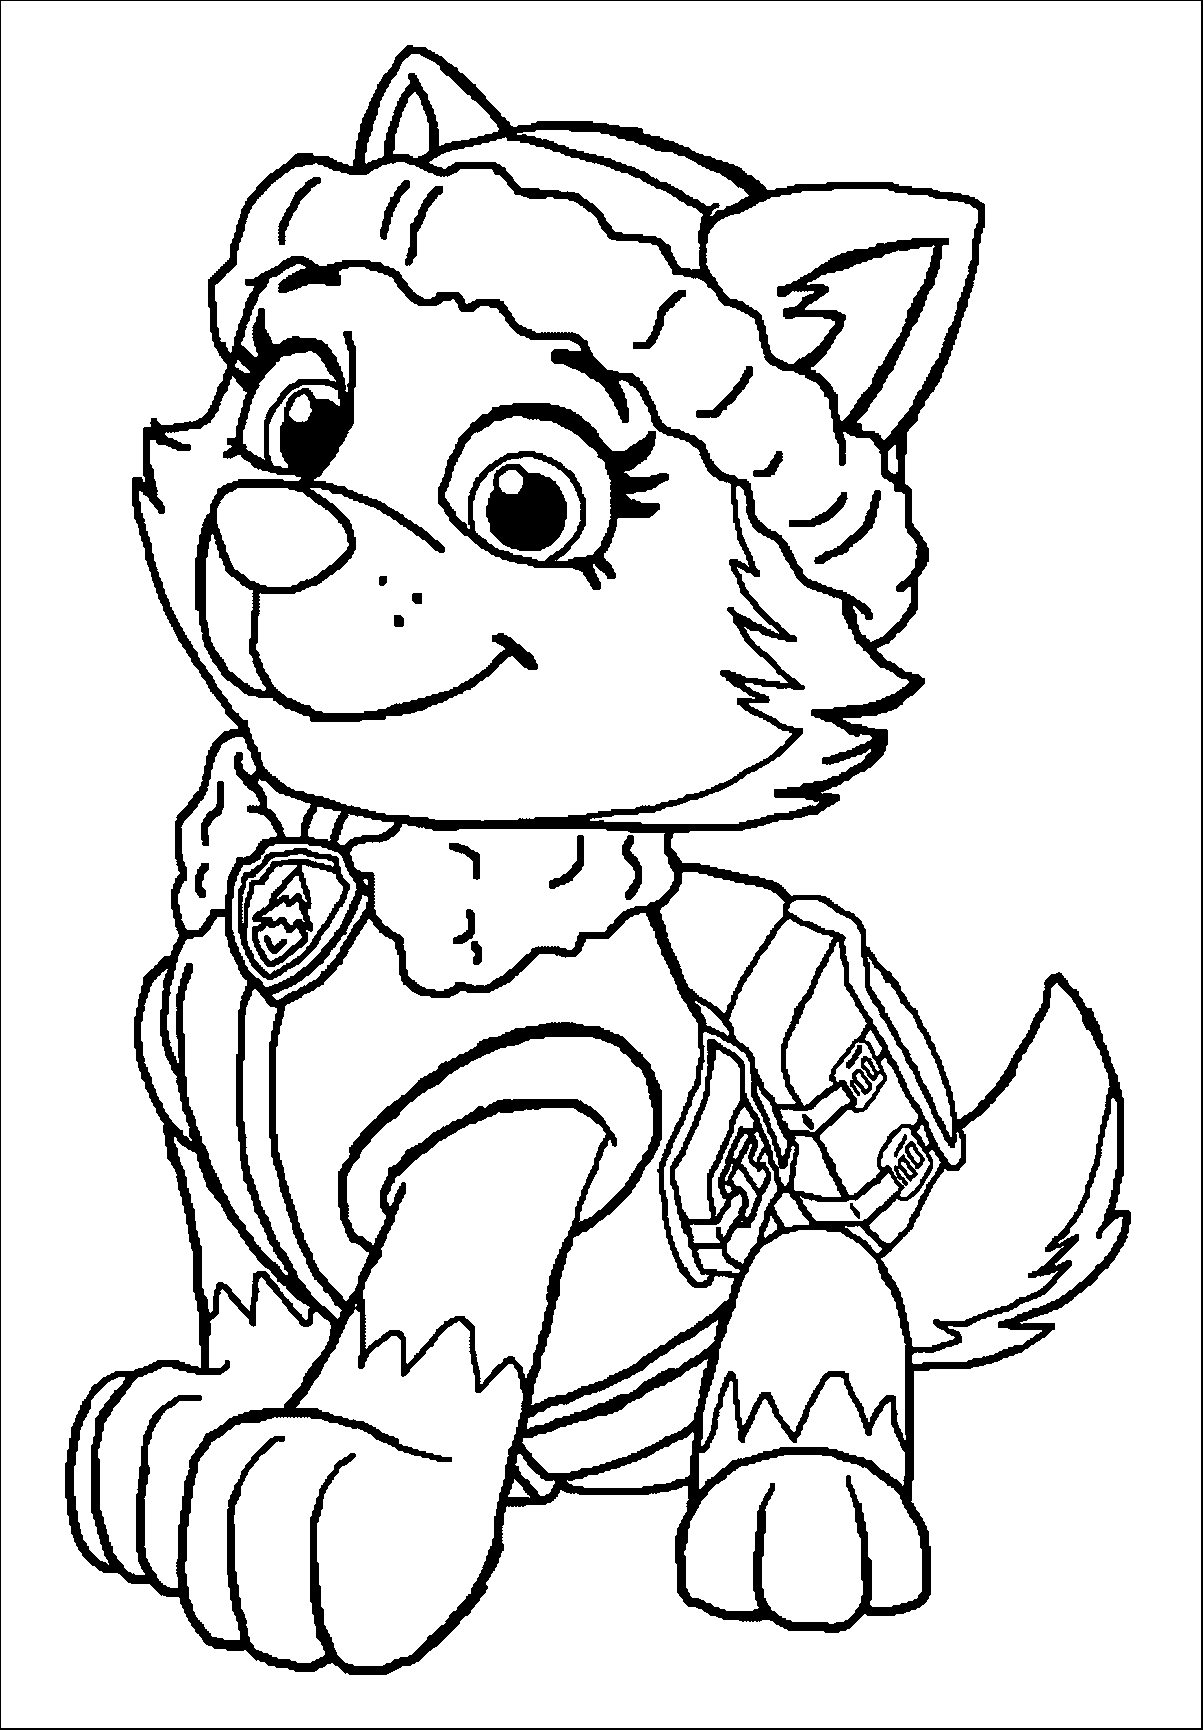 Paw Patrol Coloring Pages FREE Printable 57